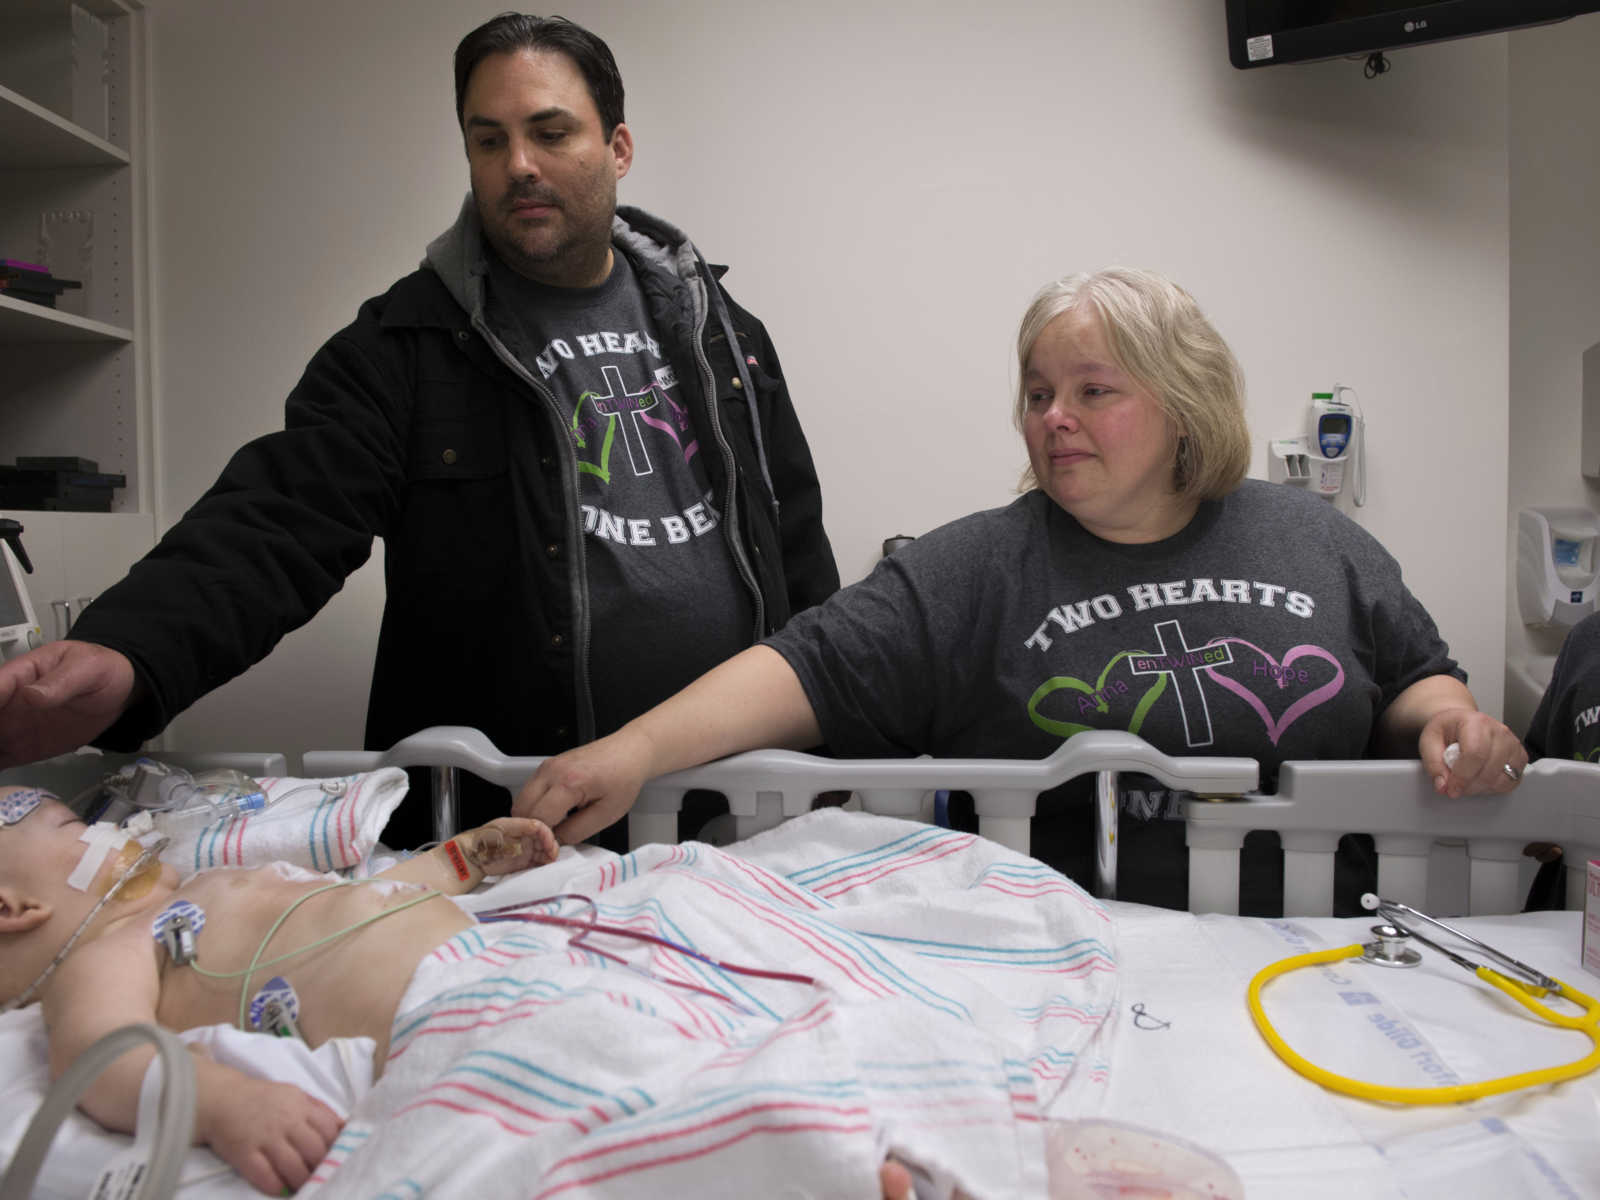 mom and dad standing at side of hospital bed reach arms out to touch baby after surgery 